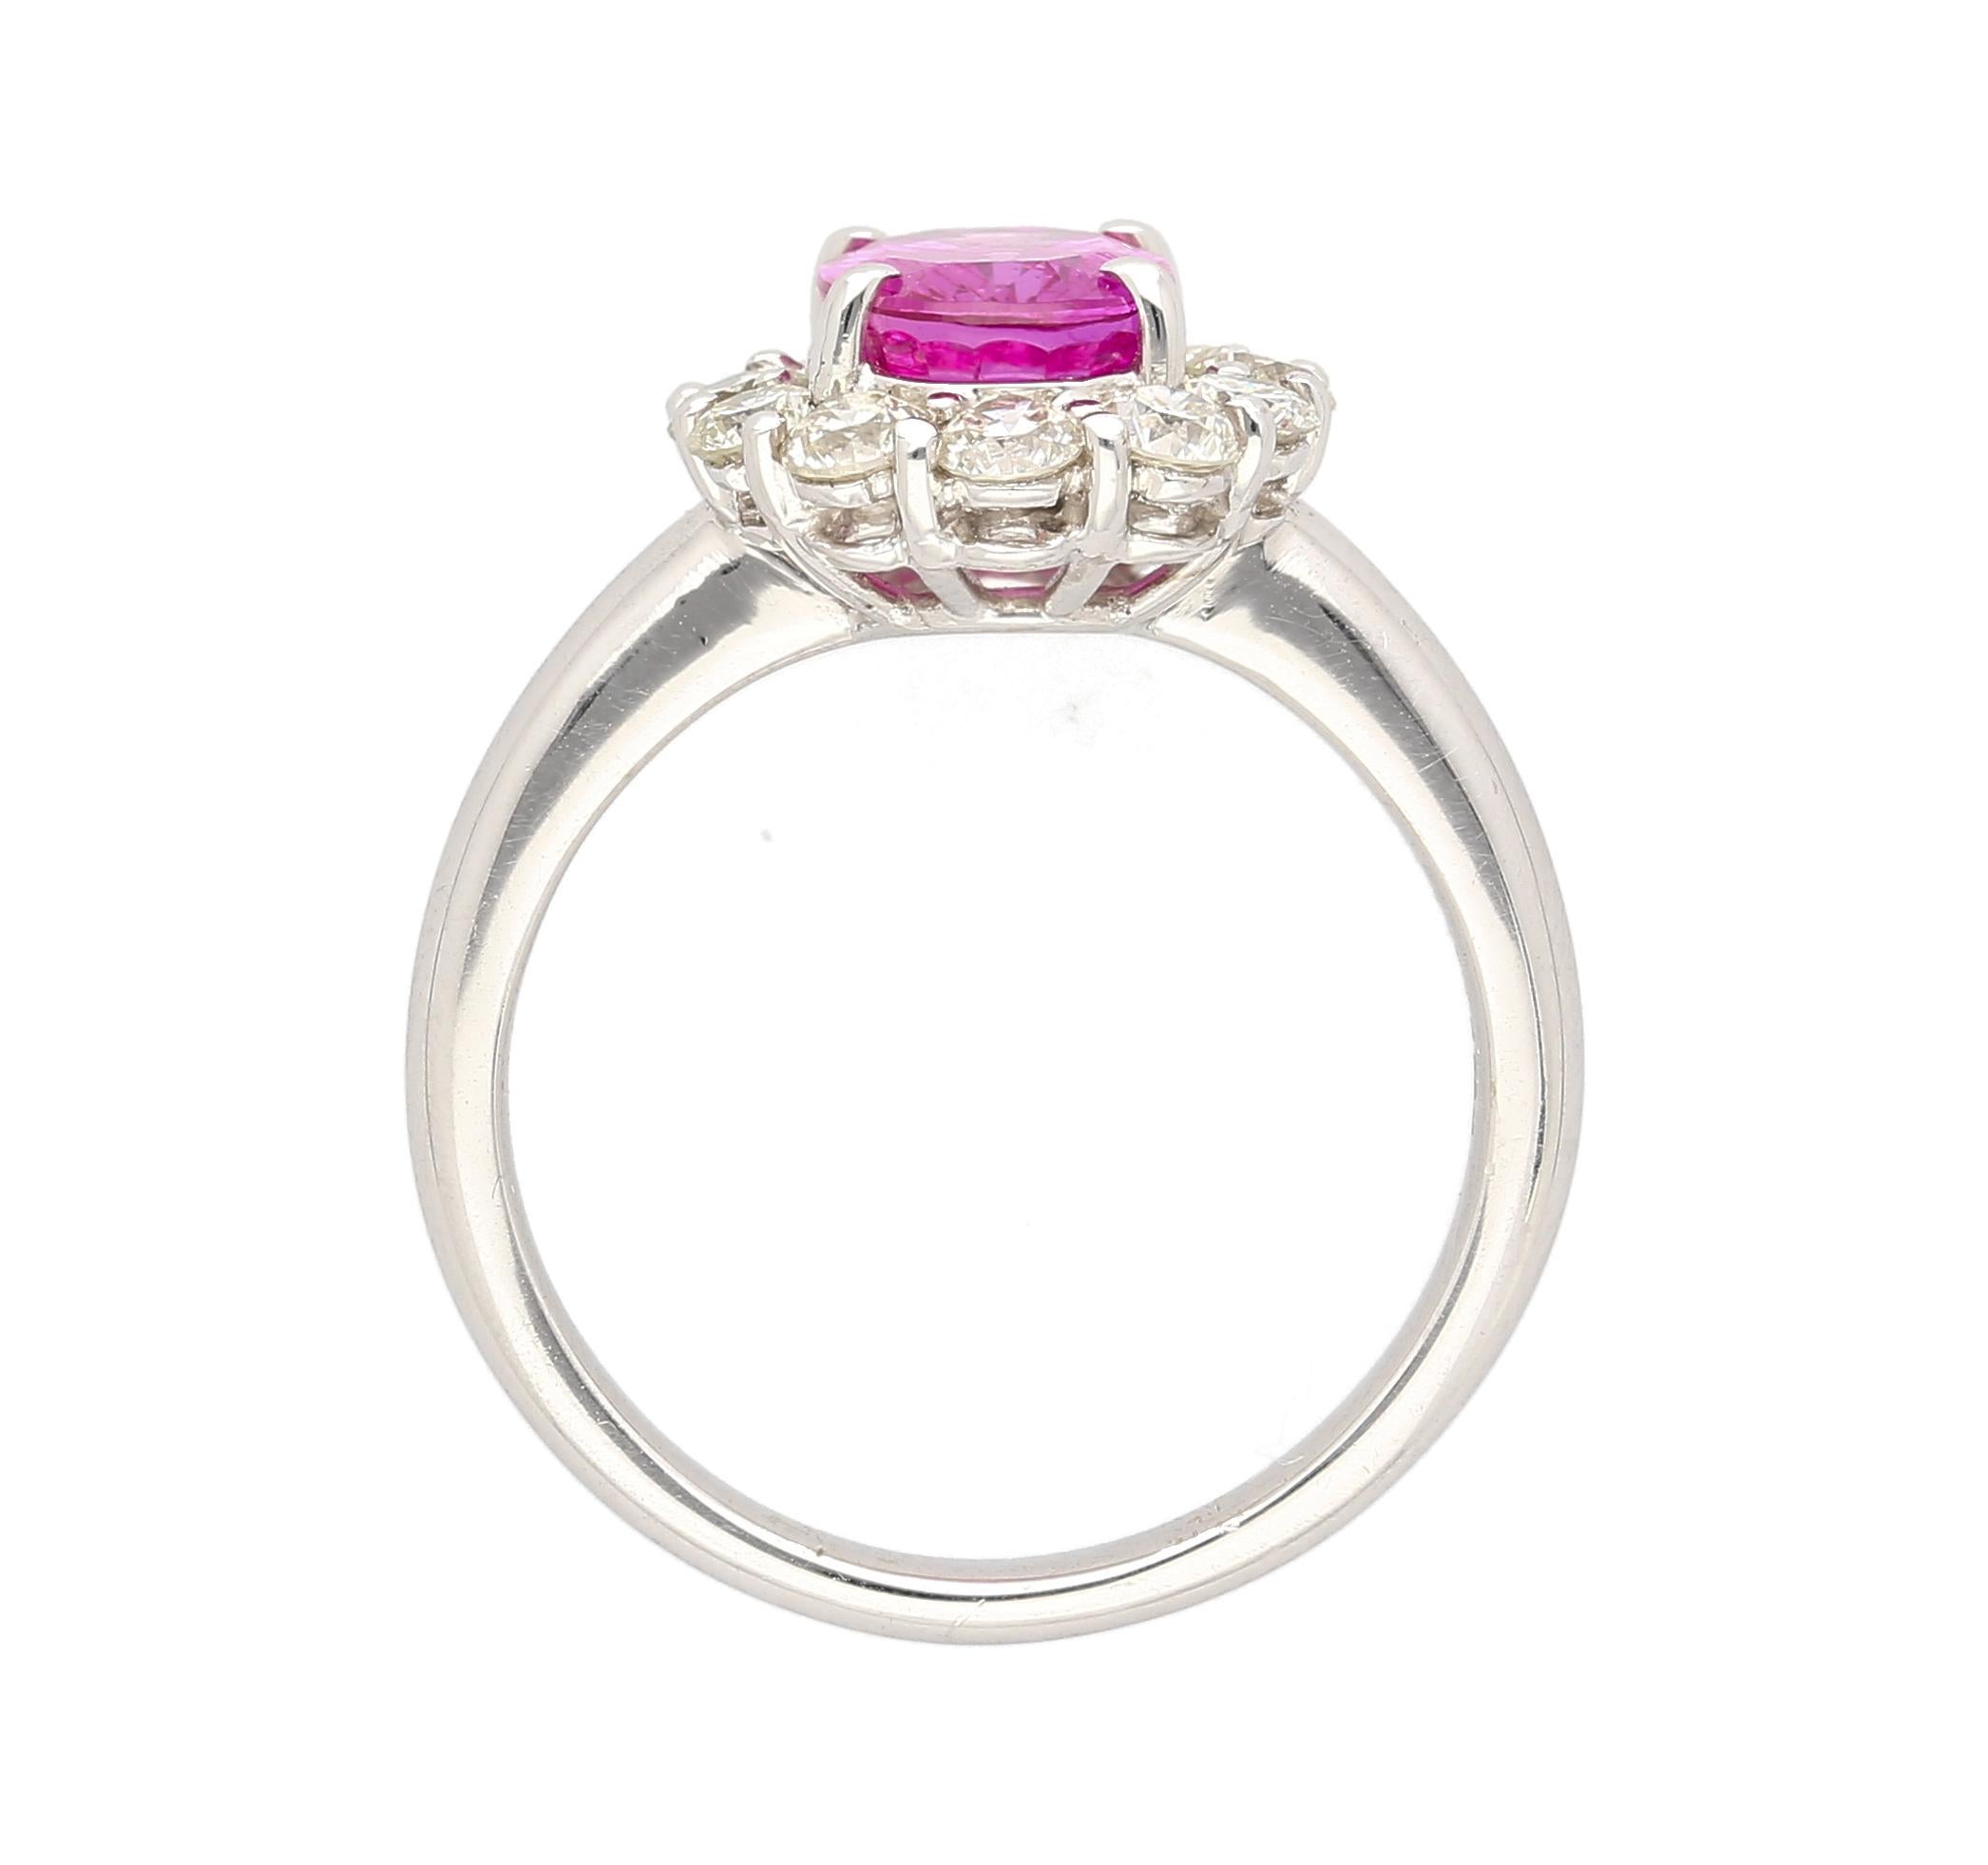 3.96 Carat Oval Cut Pink Sapphire and Diamond Halo Ring in 18k White Gold For Sale 2